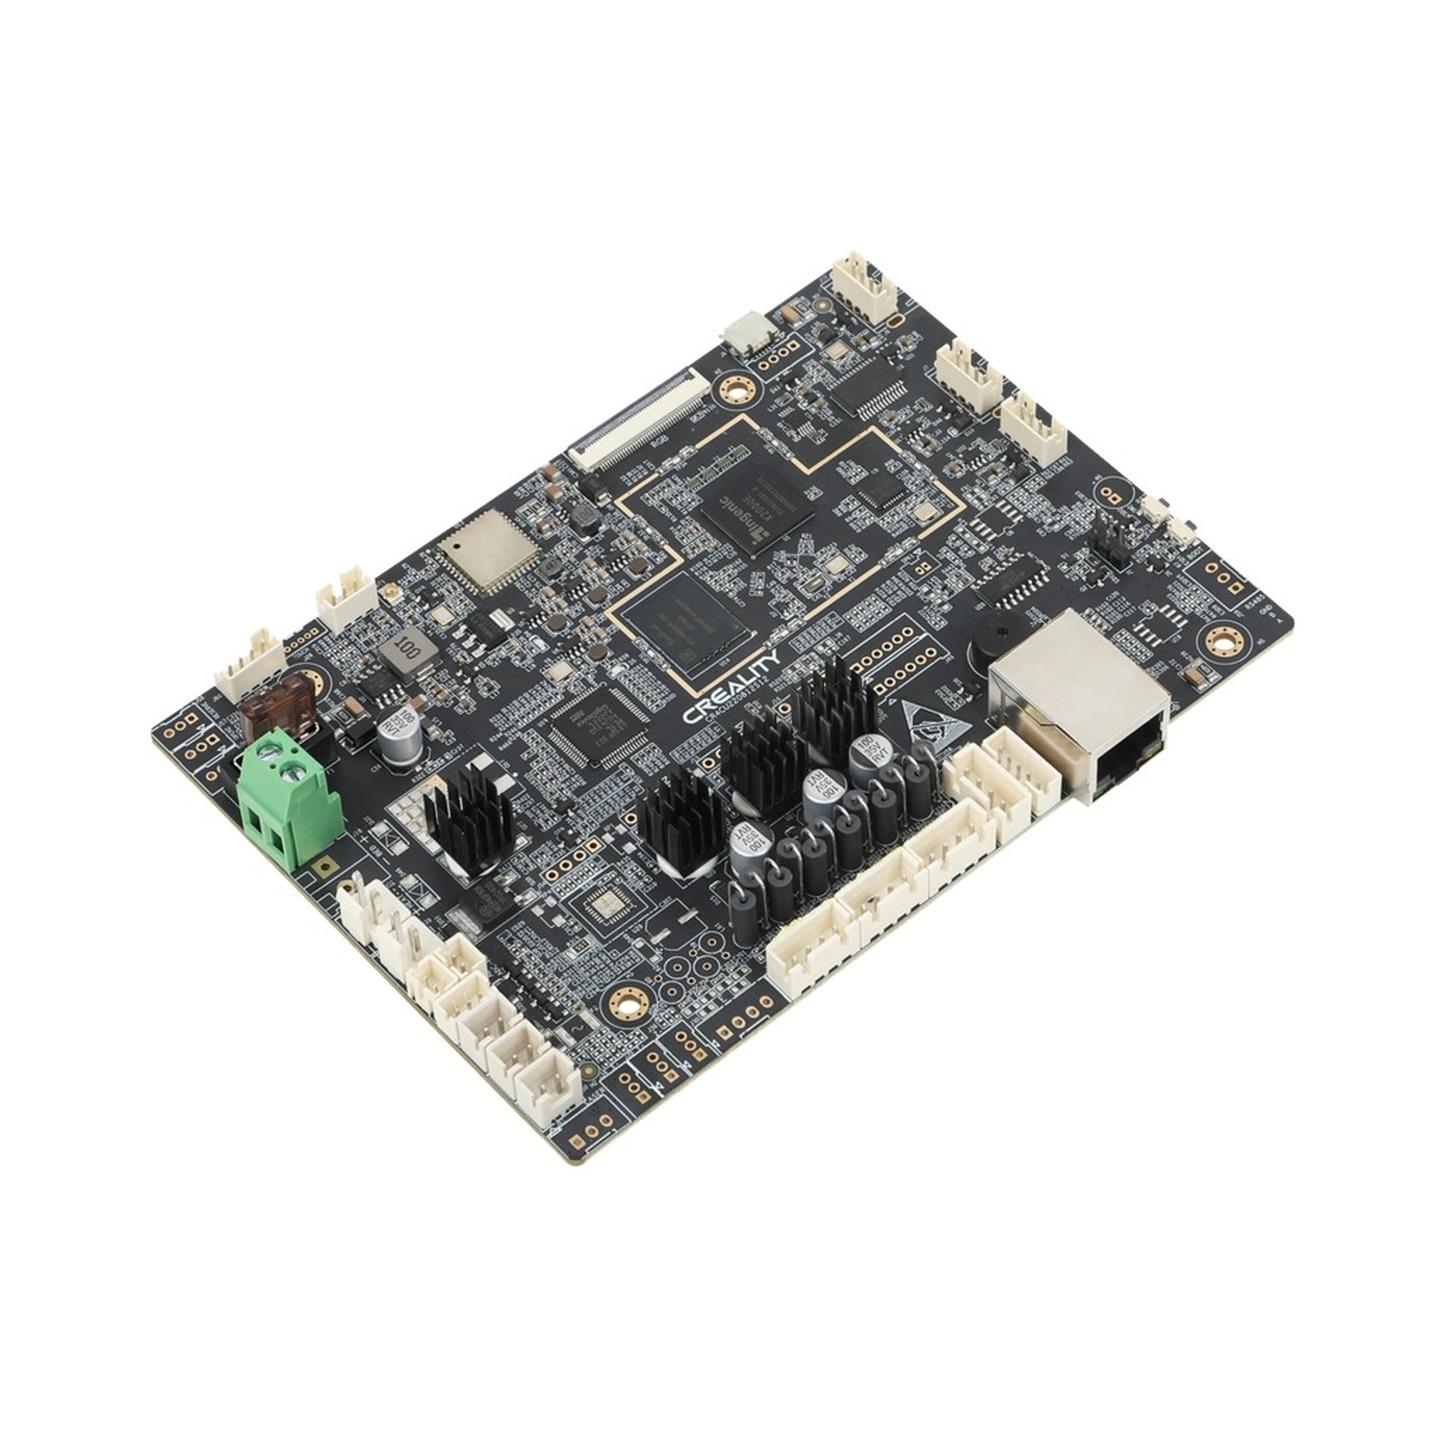 Replacement Mainboard Kit for K1 Max